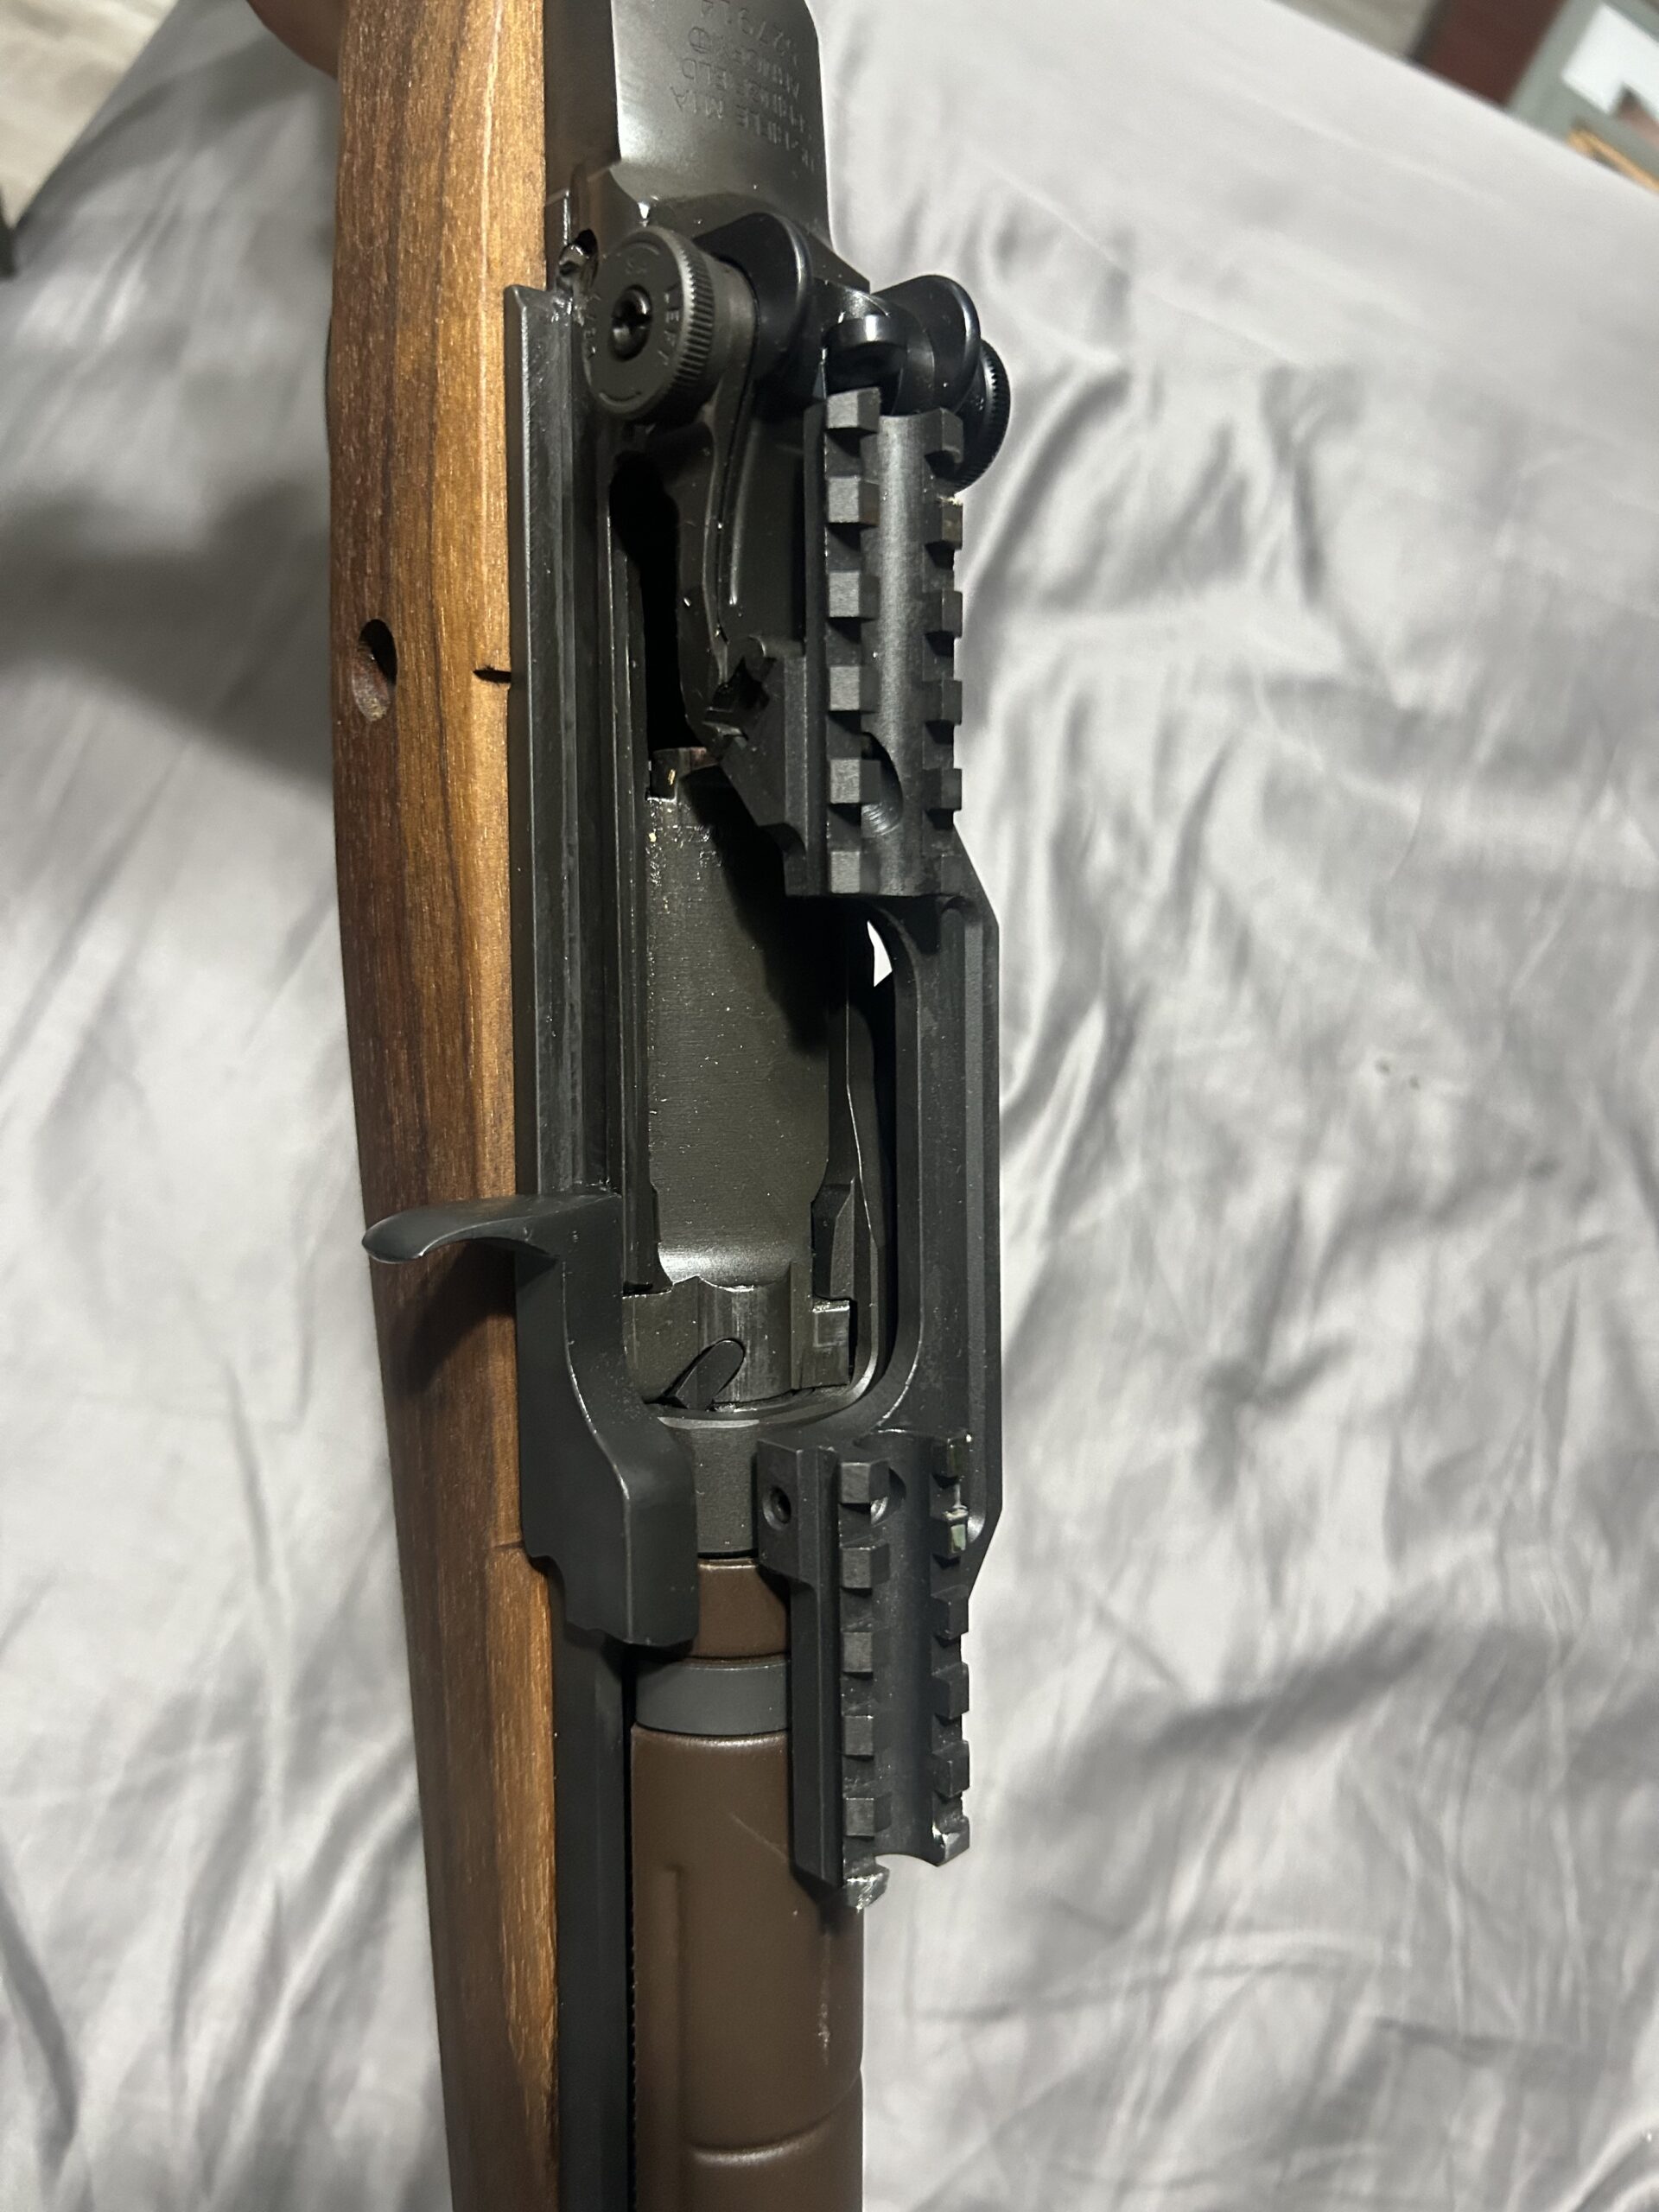 M1A (A.K.A M14) with a Steel Springfield Rail mount for Scope and Hard Case